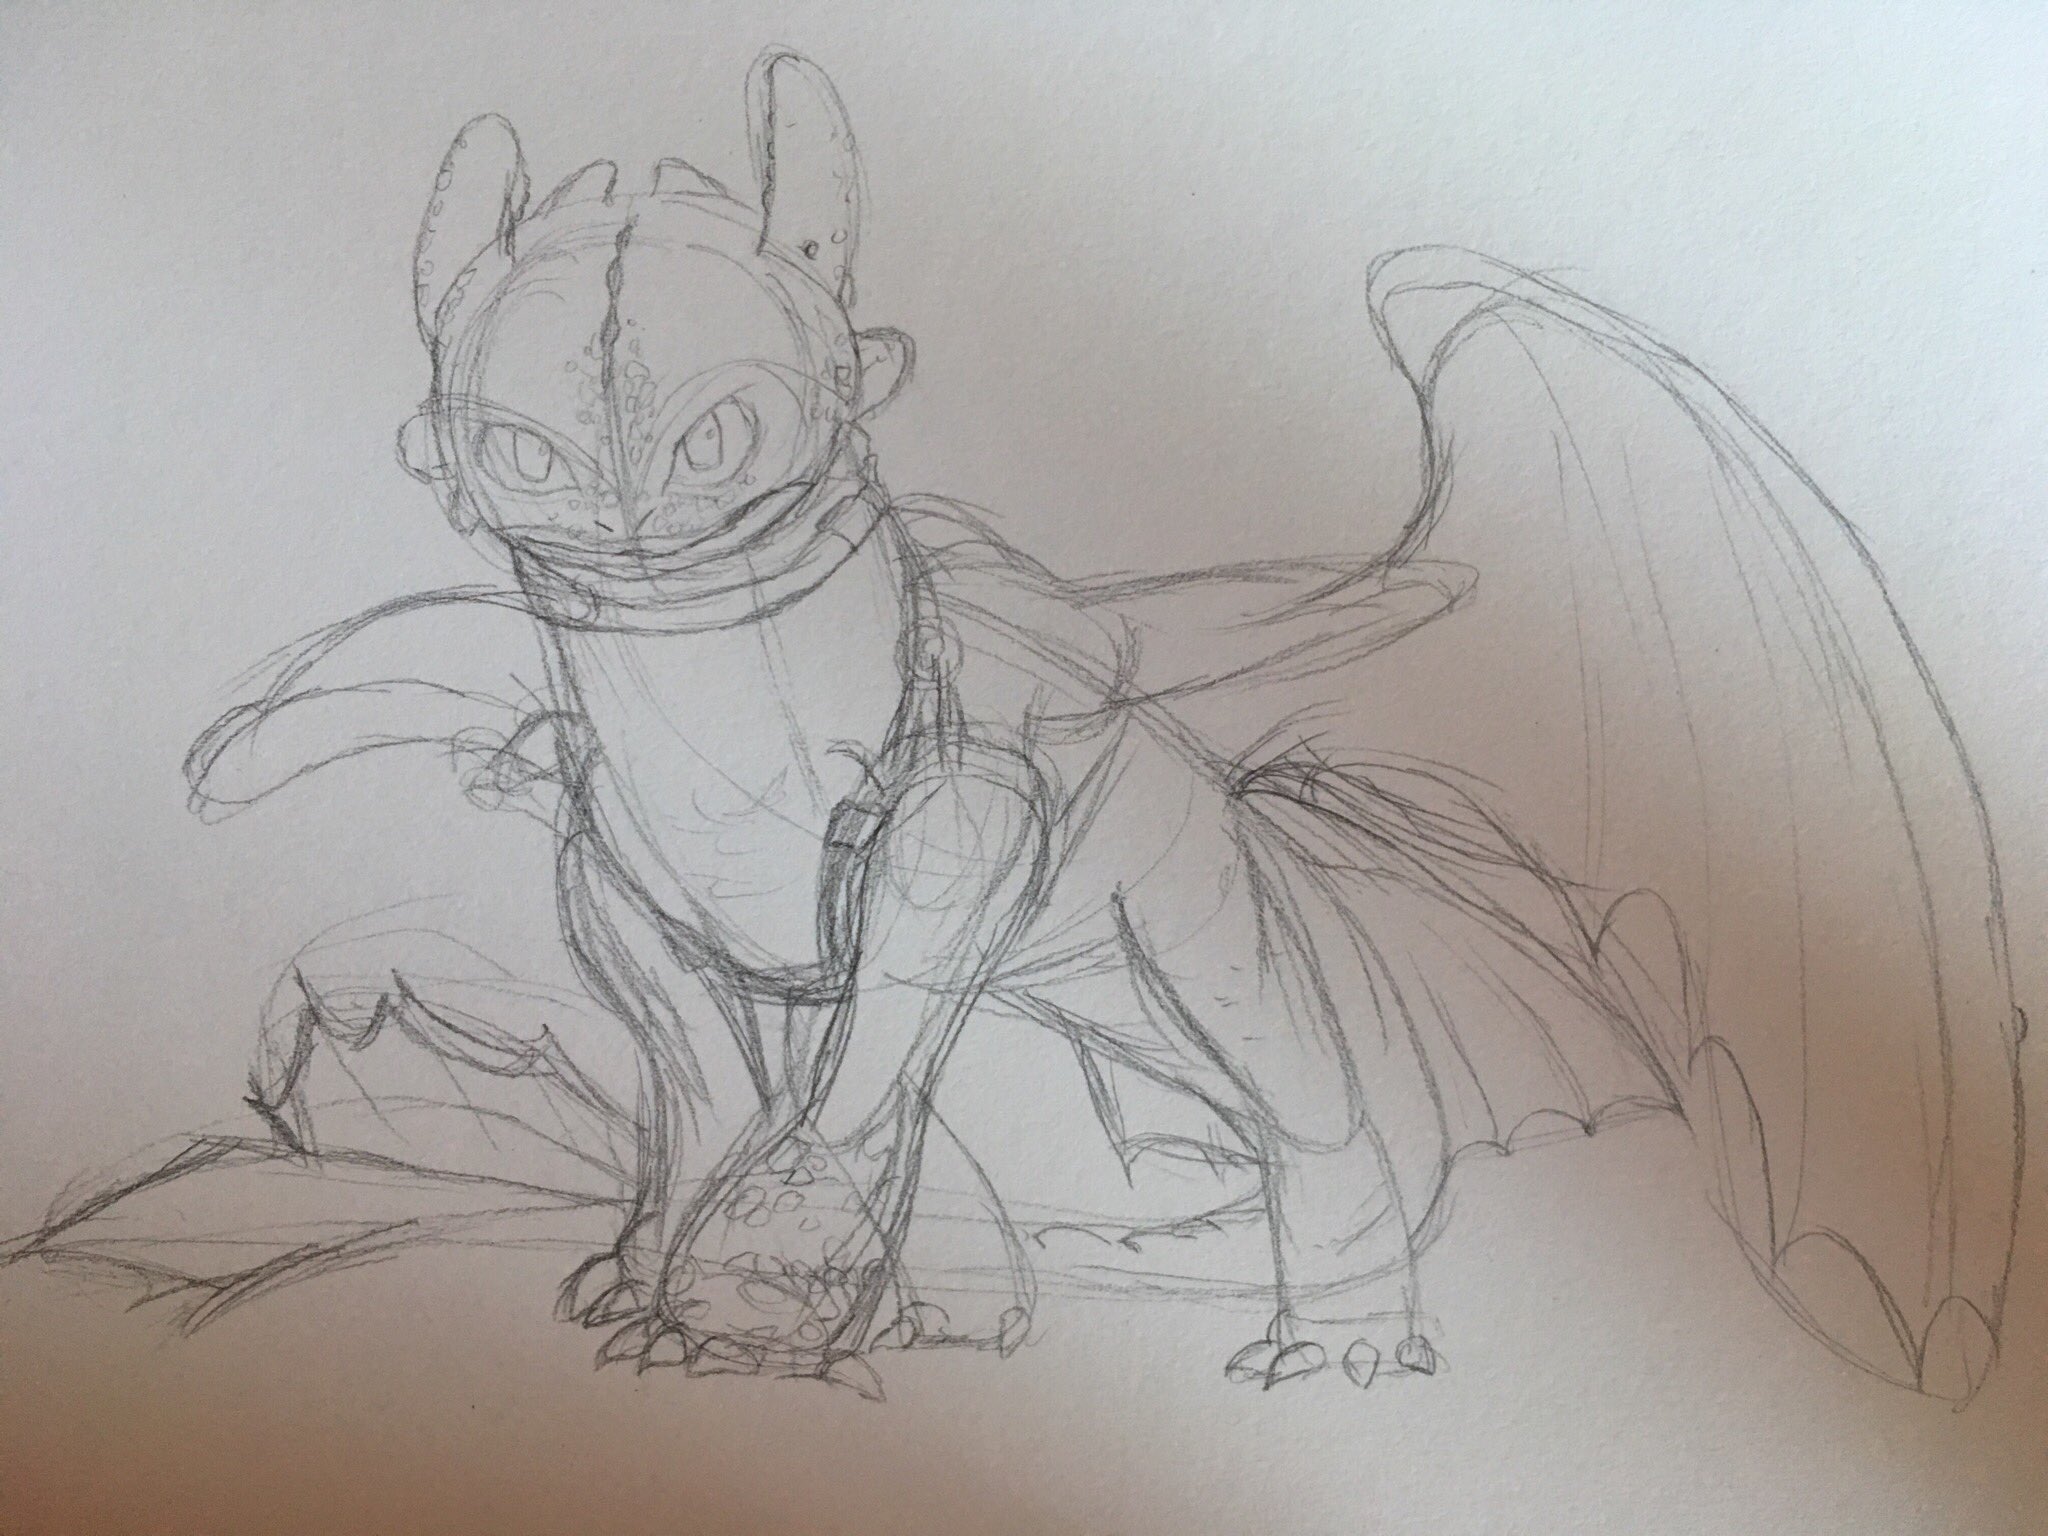 Buy Hiccups Sketch of Toothless How to Train Your Dragon Online in India   Etsy